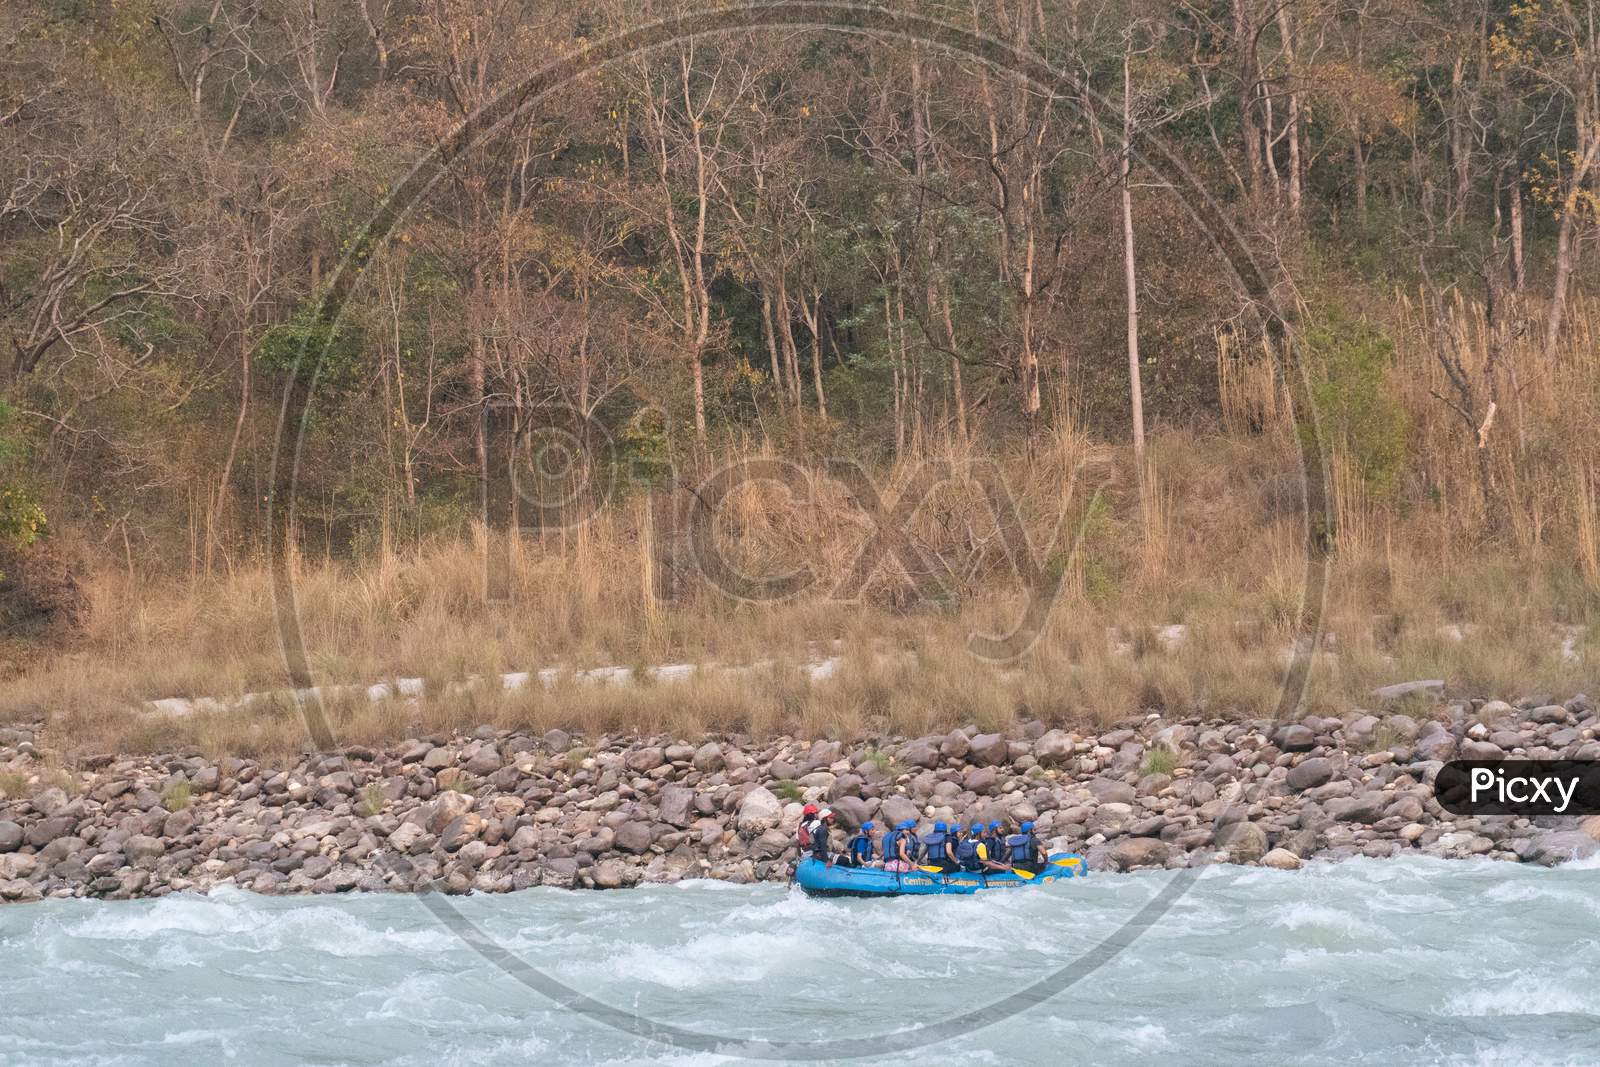 the rafting boat moves in its motion with the waves of water while river rafting in rishikesh uttarakhand, India